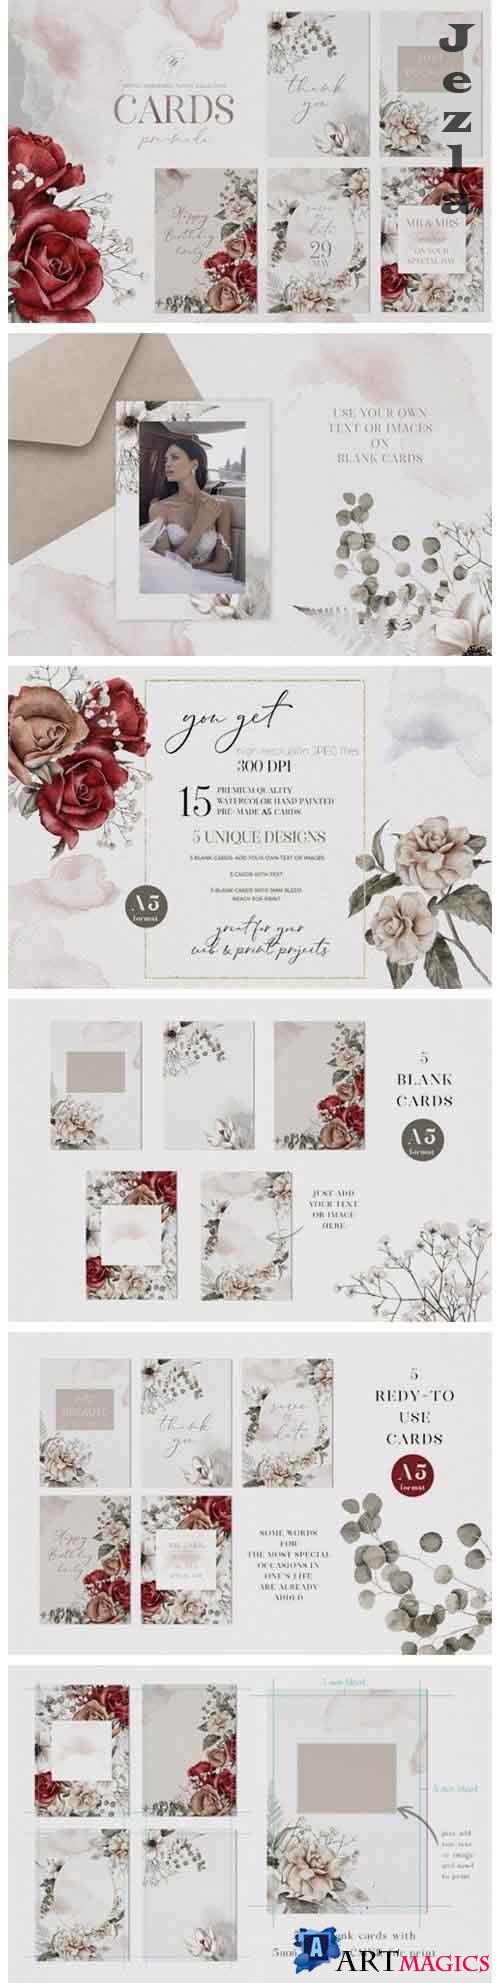 Watercolor Floral Pre-made Cards Wedding Valentine's Day - 1107526